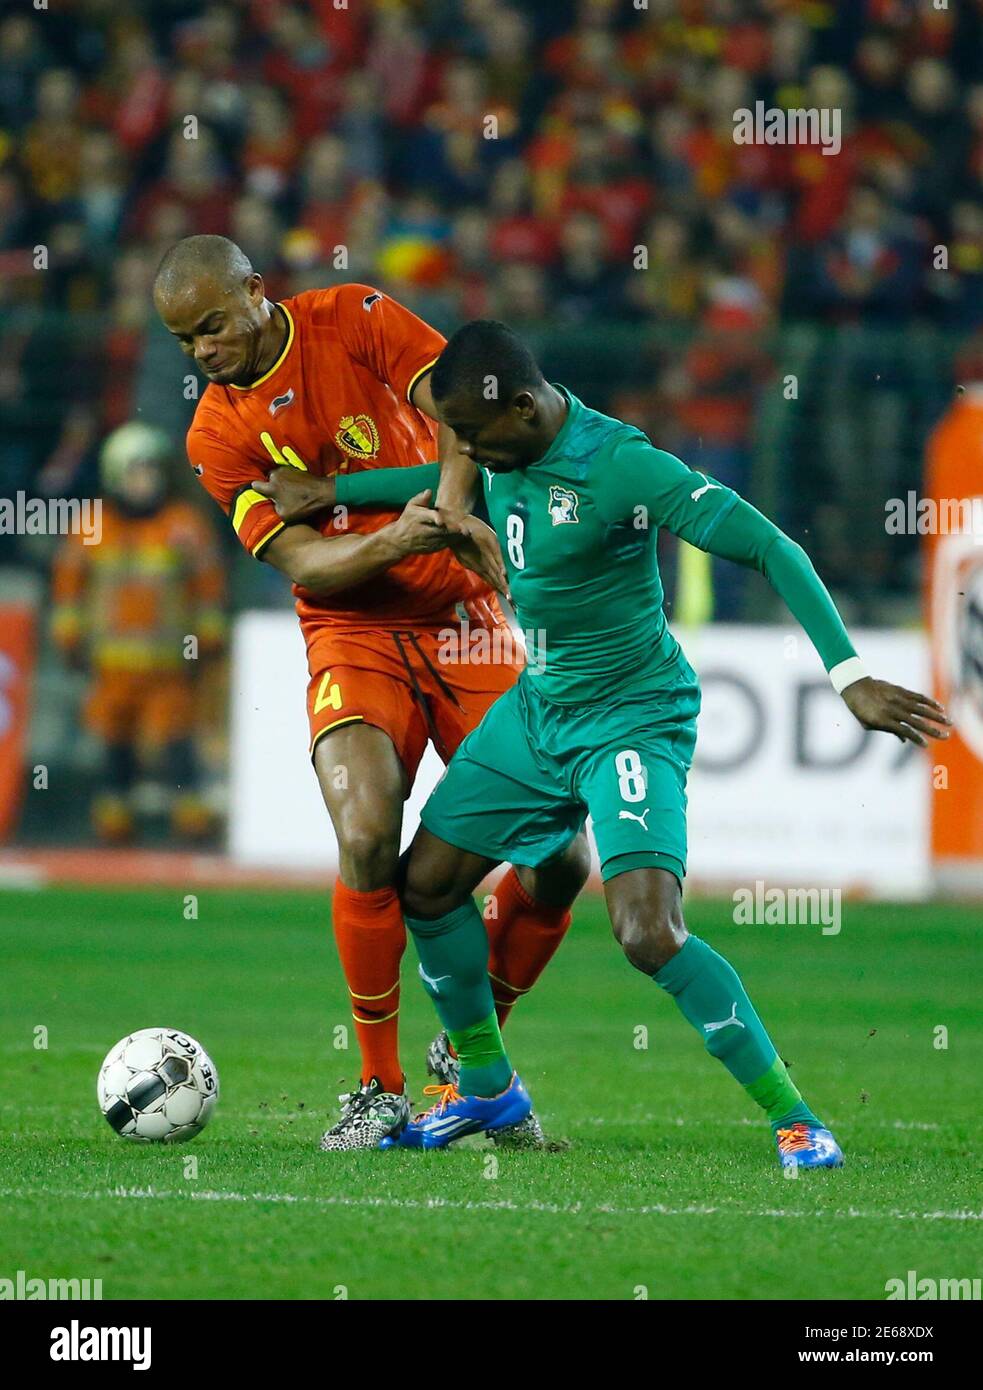 Belgium's Vincent Kompany (L) and Ivory Coast's Salomon Kalou battle for  the ball during their international friendly soccer match at King Baudouin  Stadium in Brussels March 5, 2014. REUTERS/Yves Herman (BELGIUM -